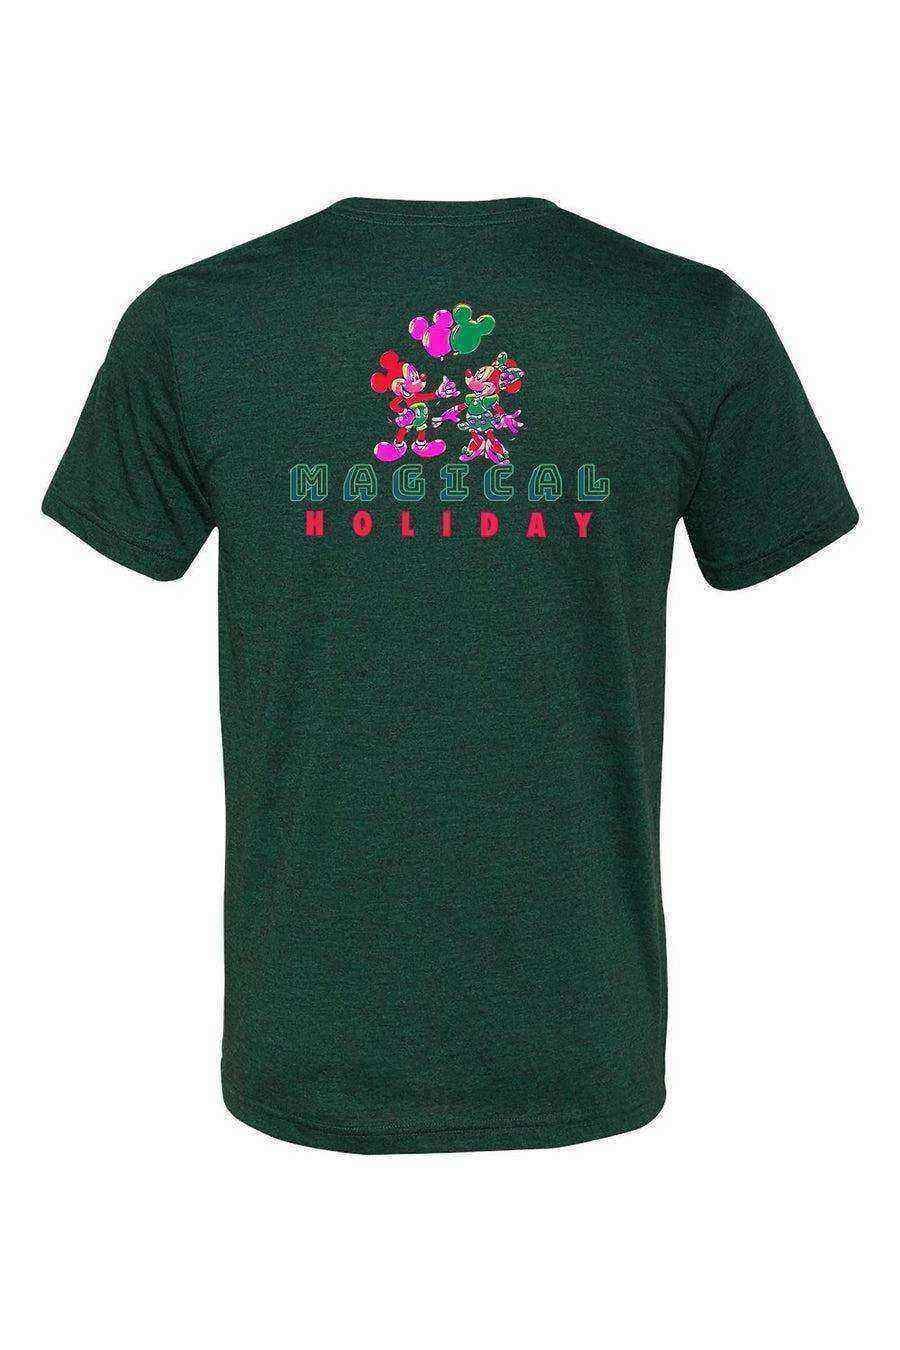 Toddler | Mouse Magical Holiday Shirt | Minnie & Mickey Christmas - Dylan's Tees